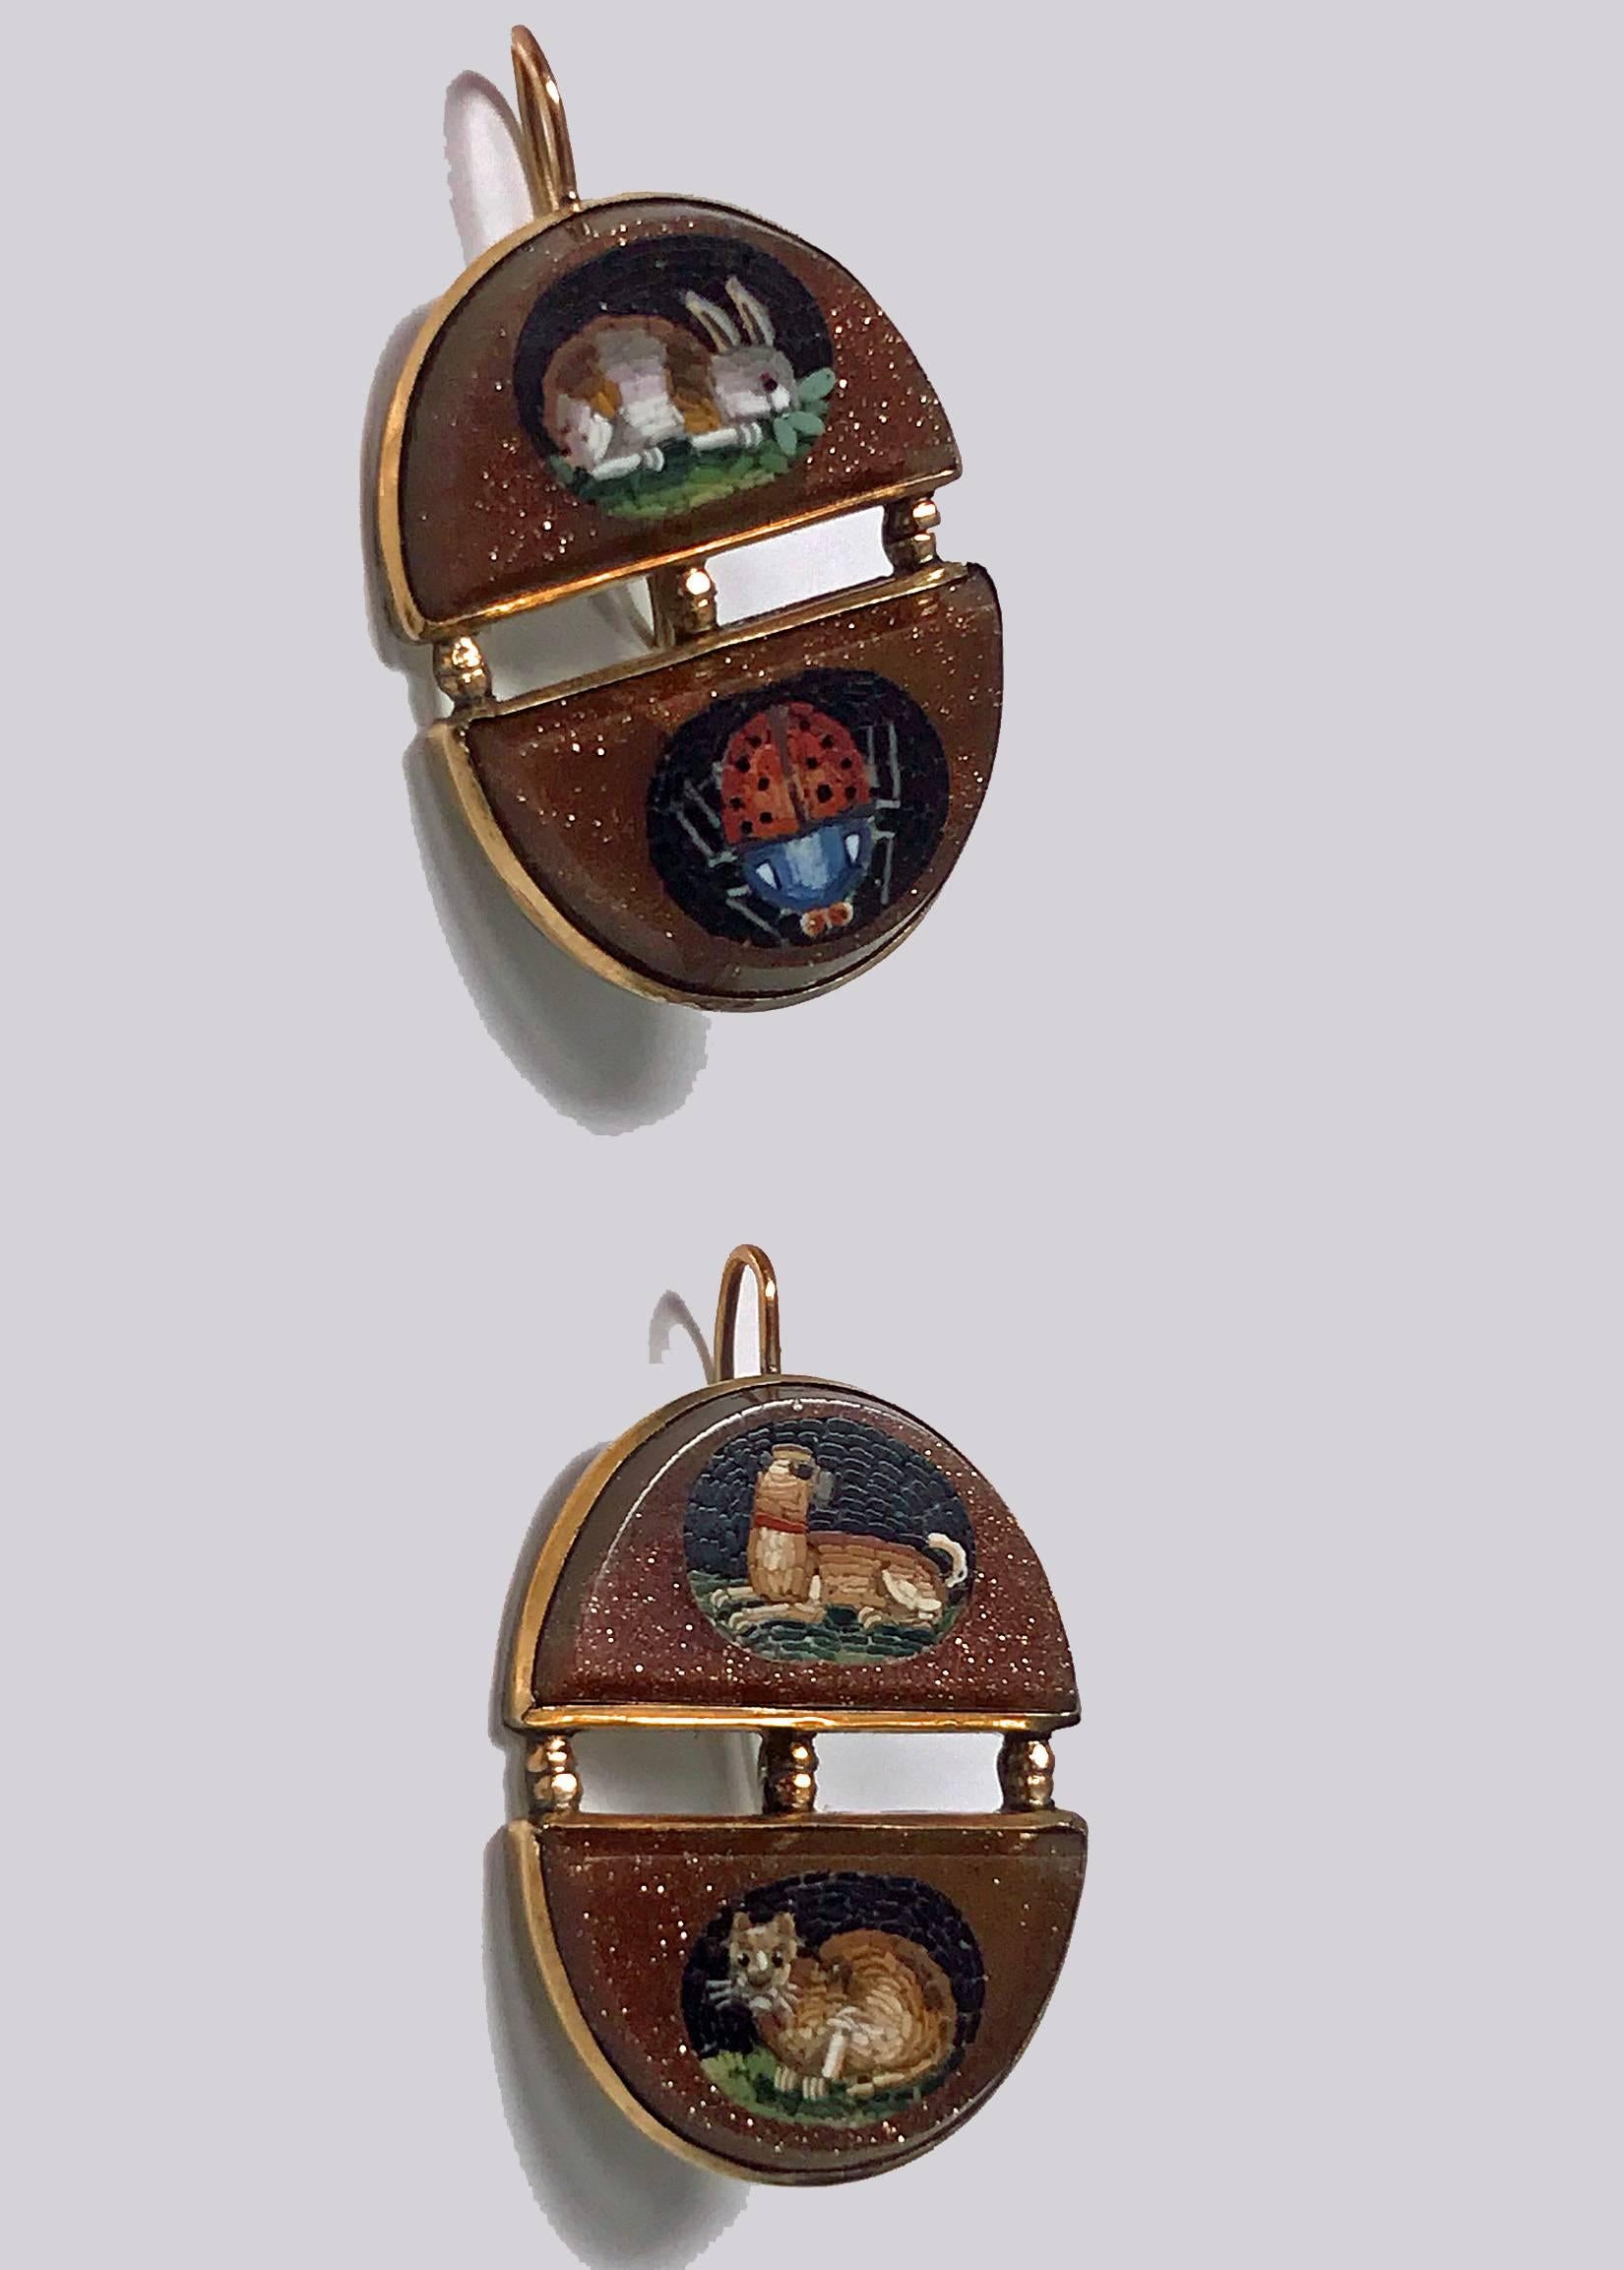 Wonderful Gold Mosaic Earrings - rabbit, ladybug, dog and cat, C.1875. Each earring depicting micro mosaic animals on goldstone background. All mounted in 18K tested (later 10K hook fitments). Measure: Approximately 26 x 20 mm. Total Item Weight: